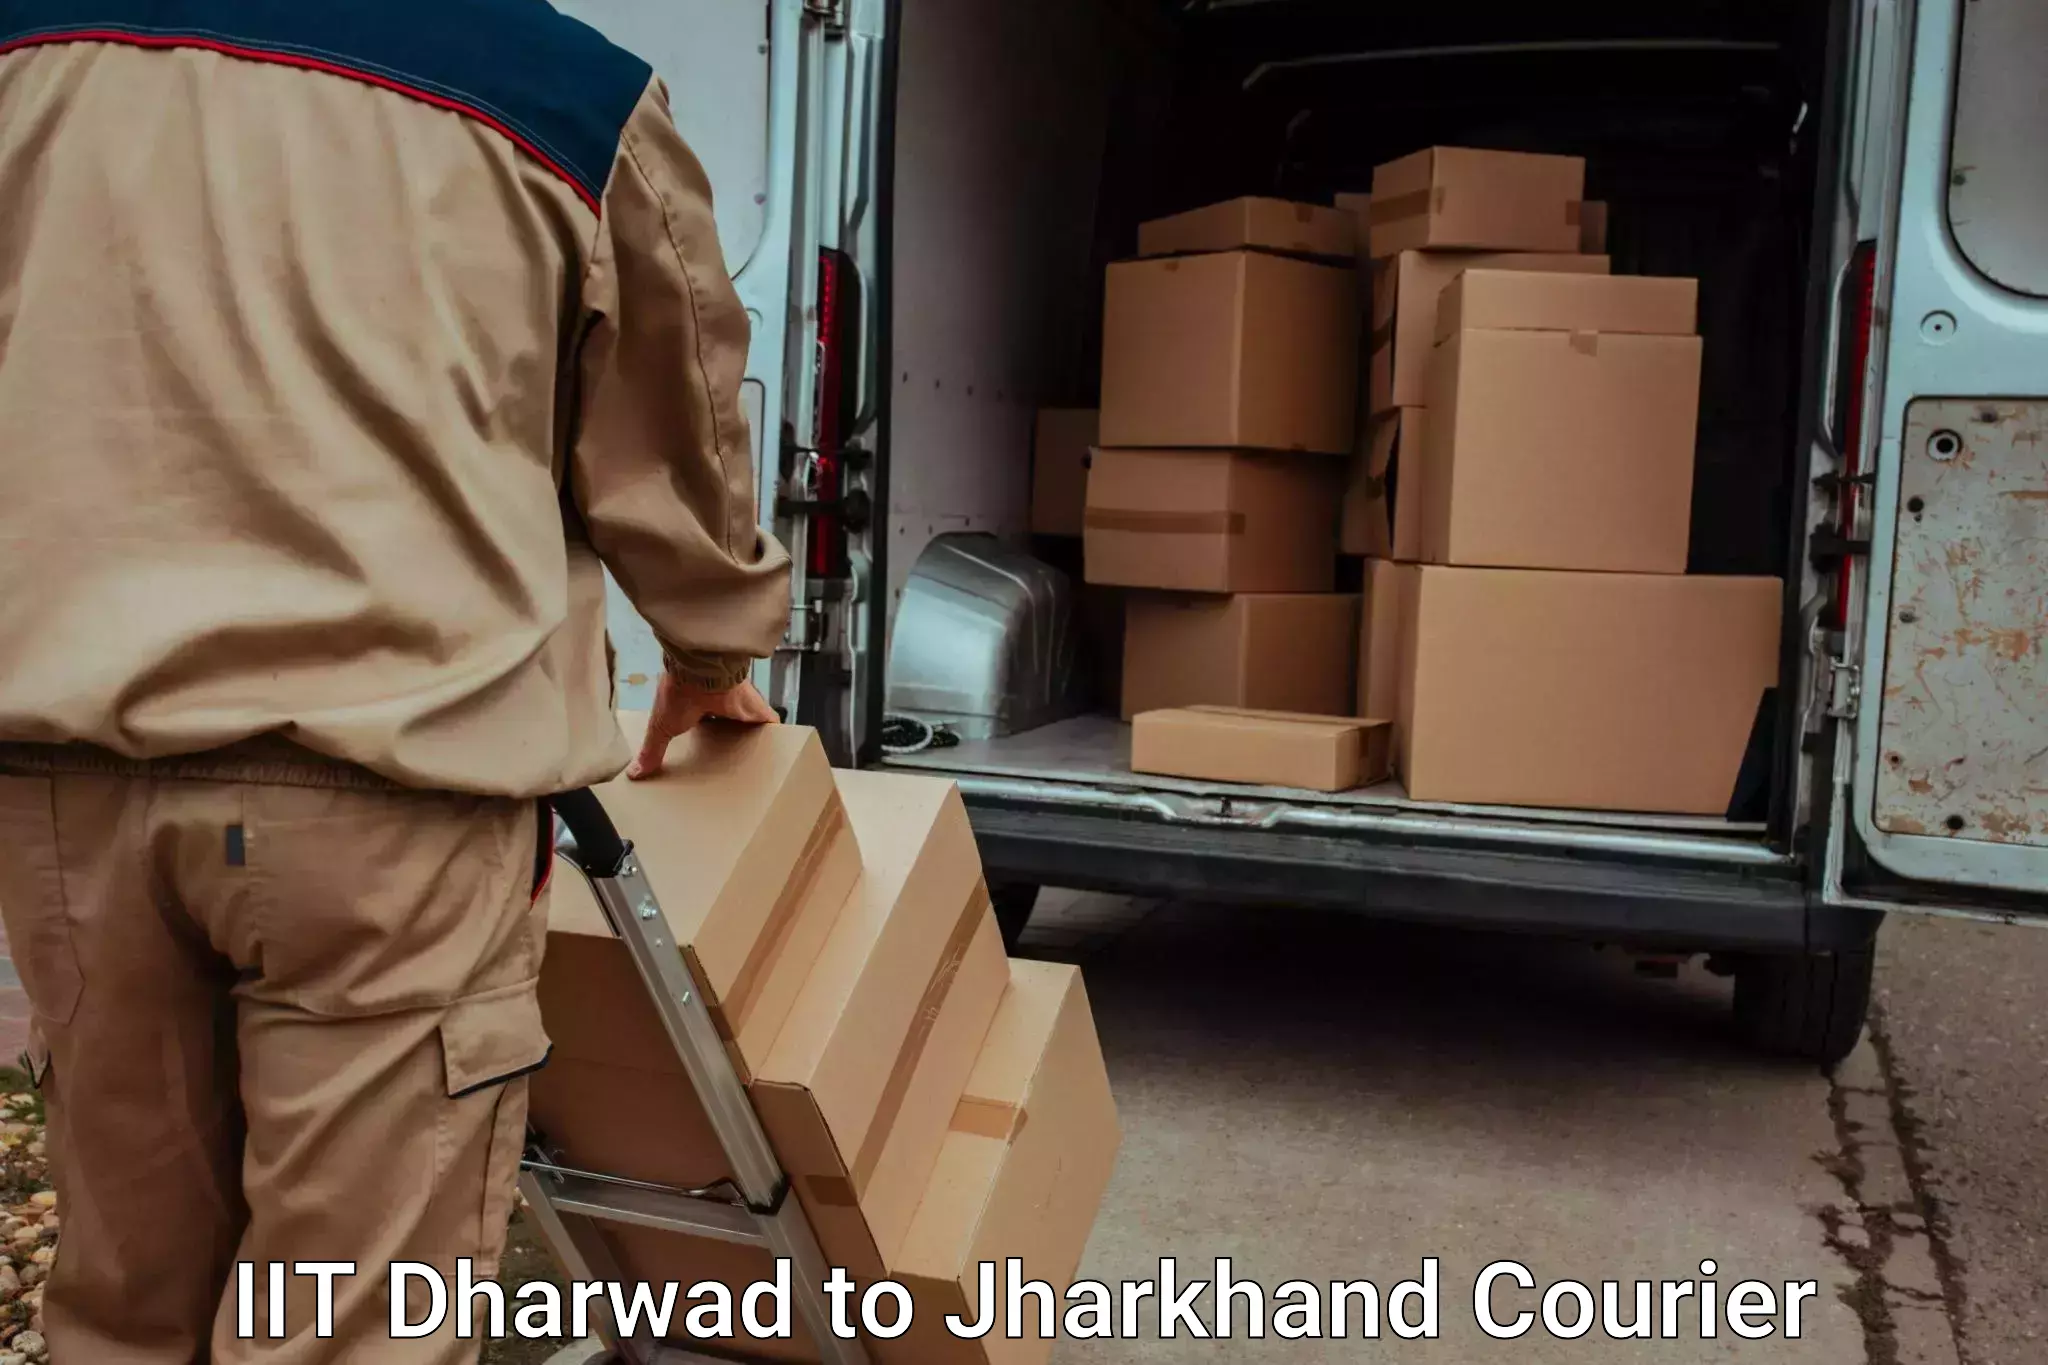 Luggage transport consultancy IIT Dharwad to Jharkhand